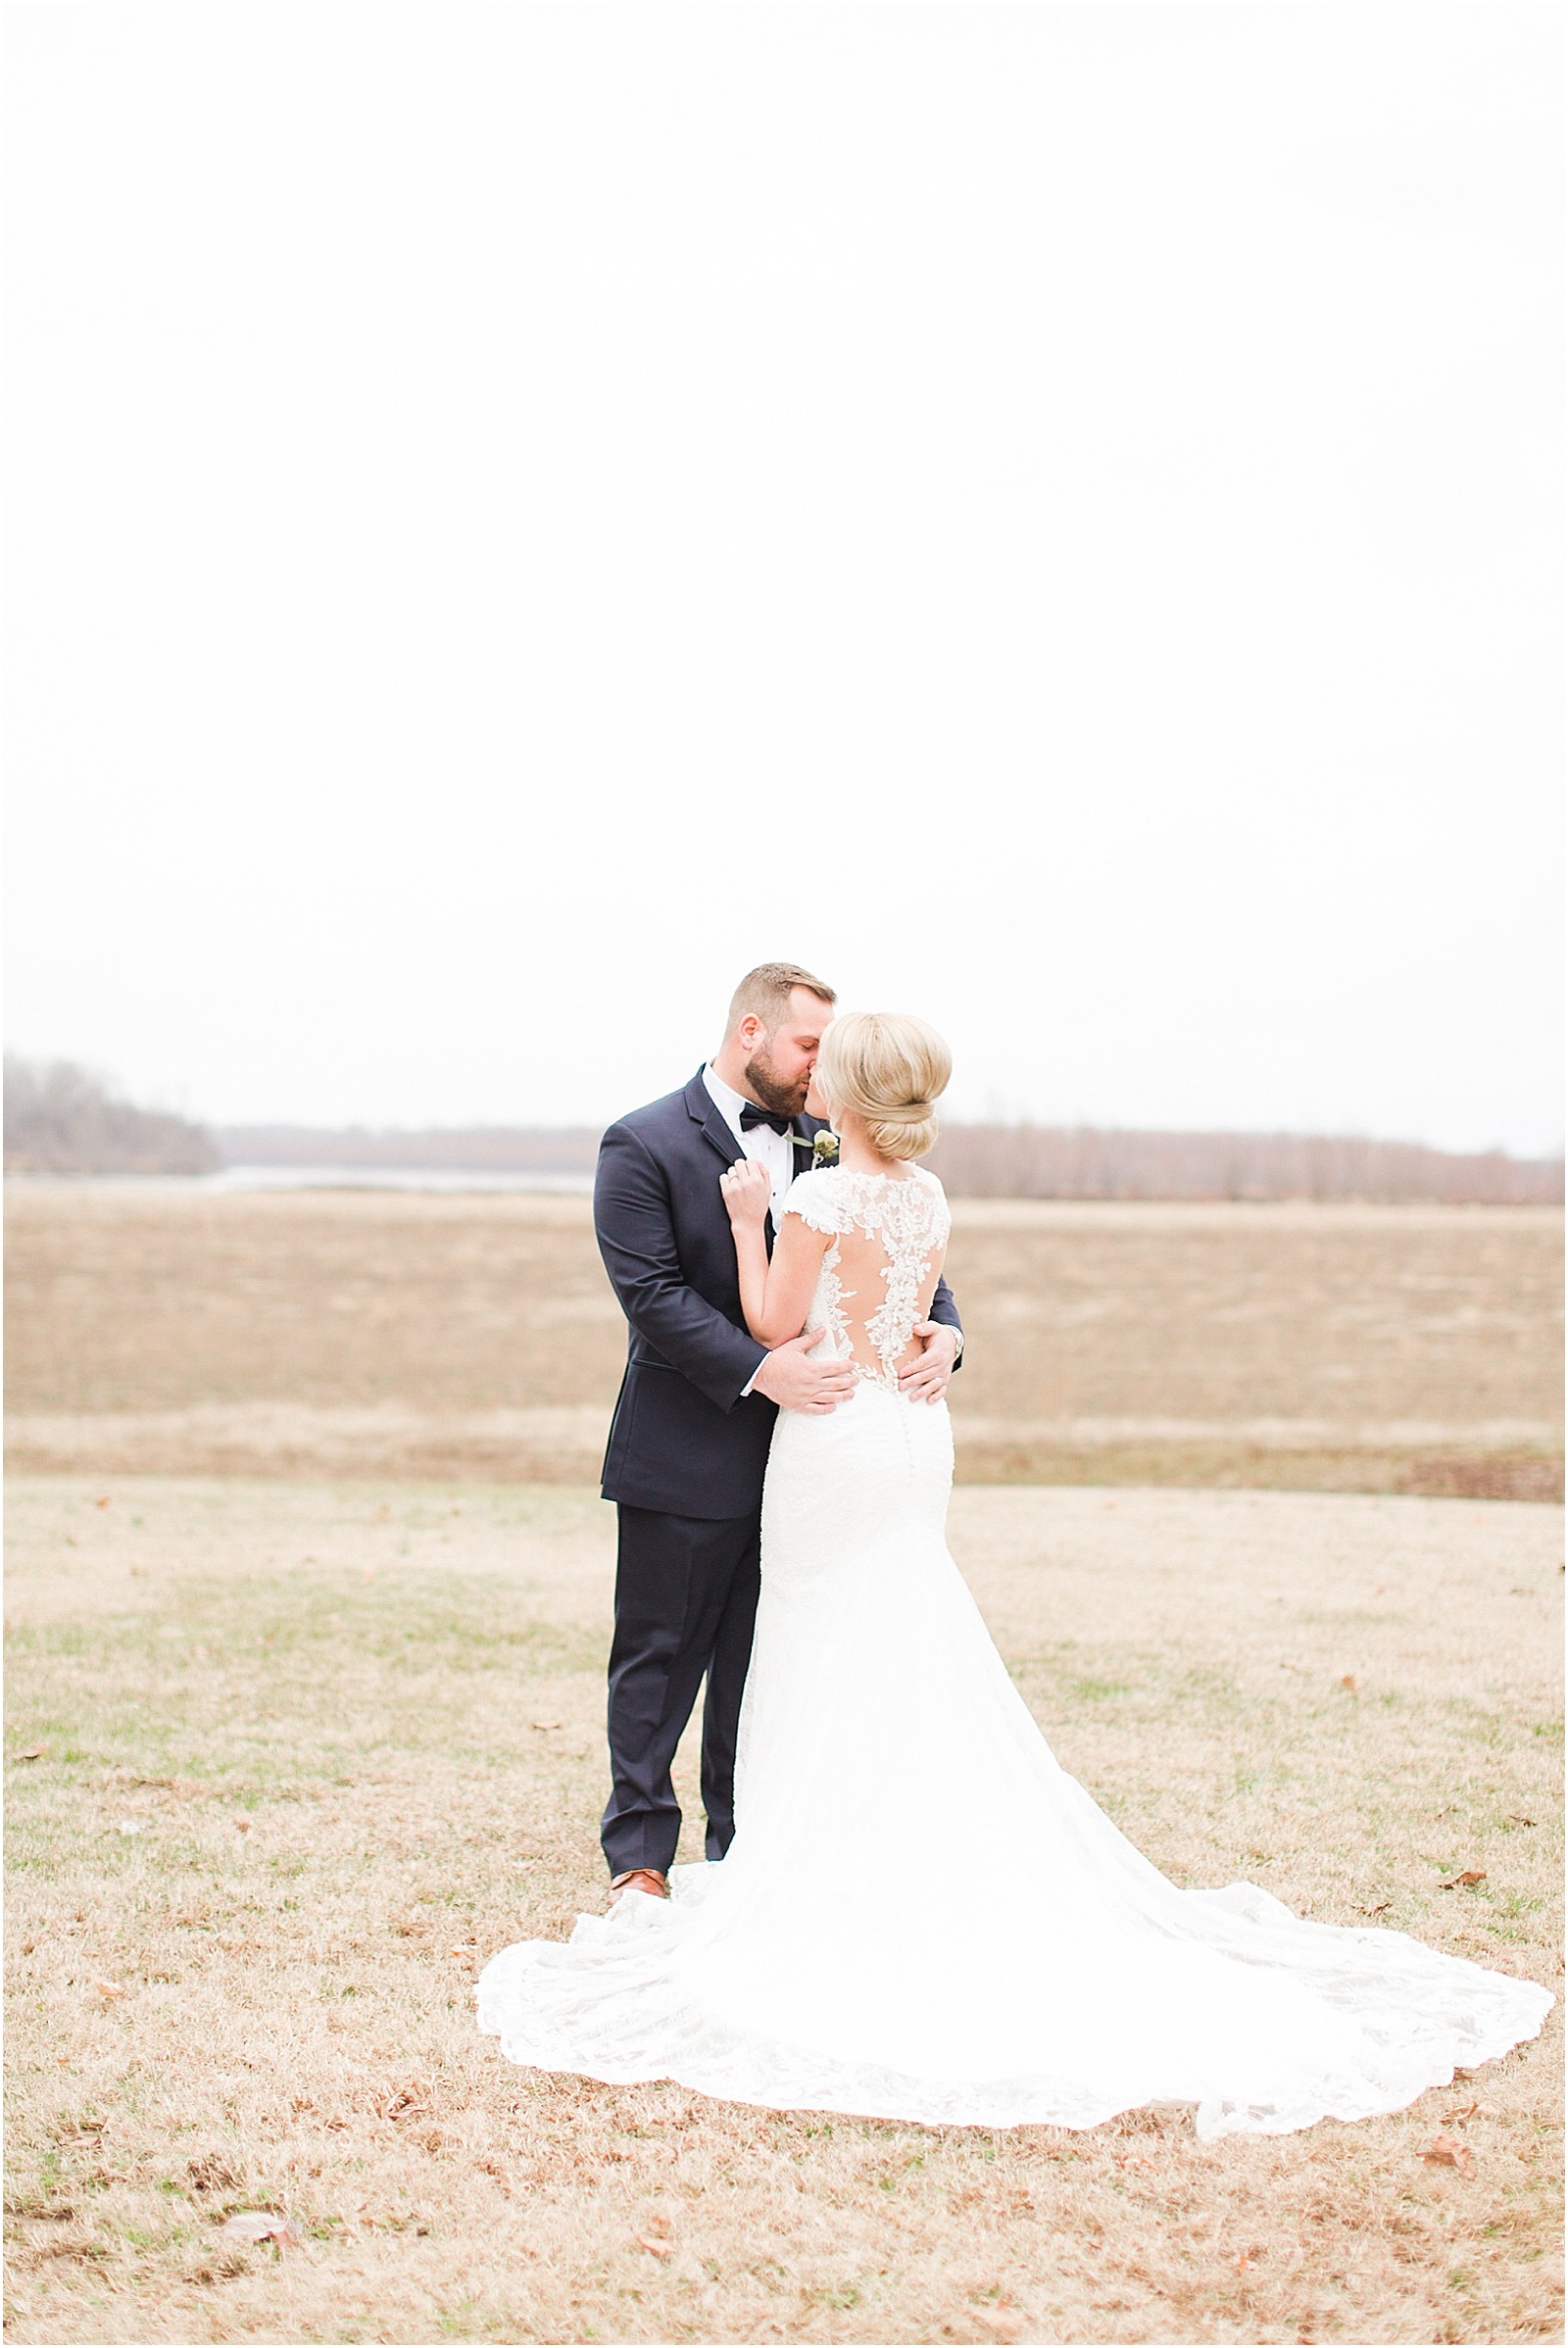 A Classic Winter Wedding in New Harmony | Rachel and Ryan | Bret and Brandie Photography 0106.jpg